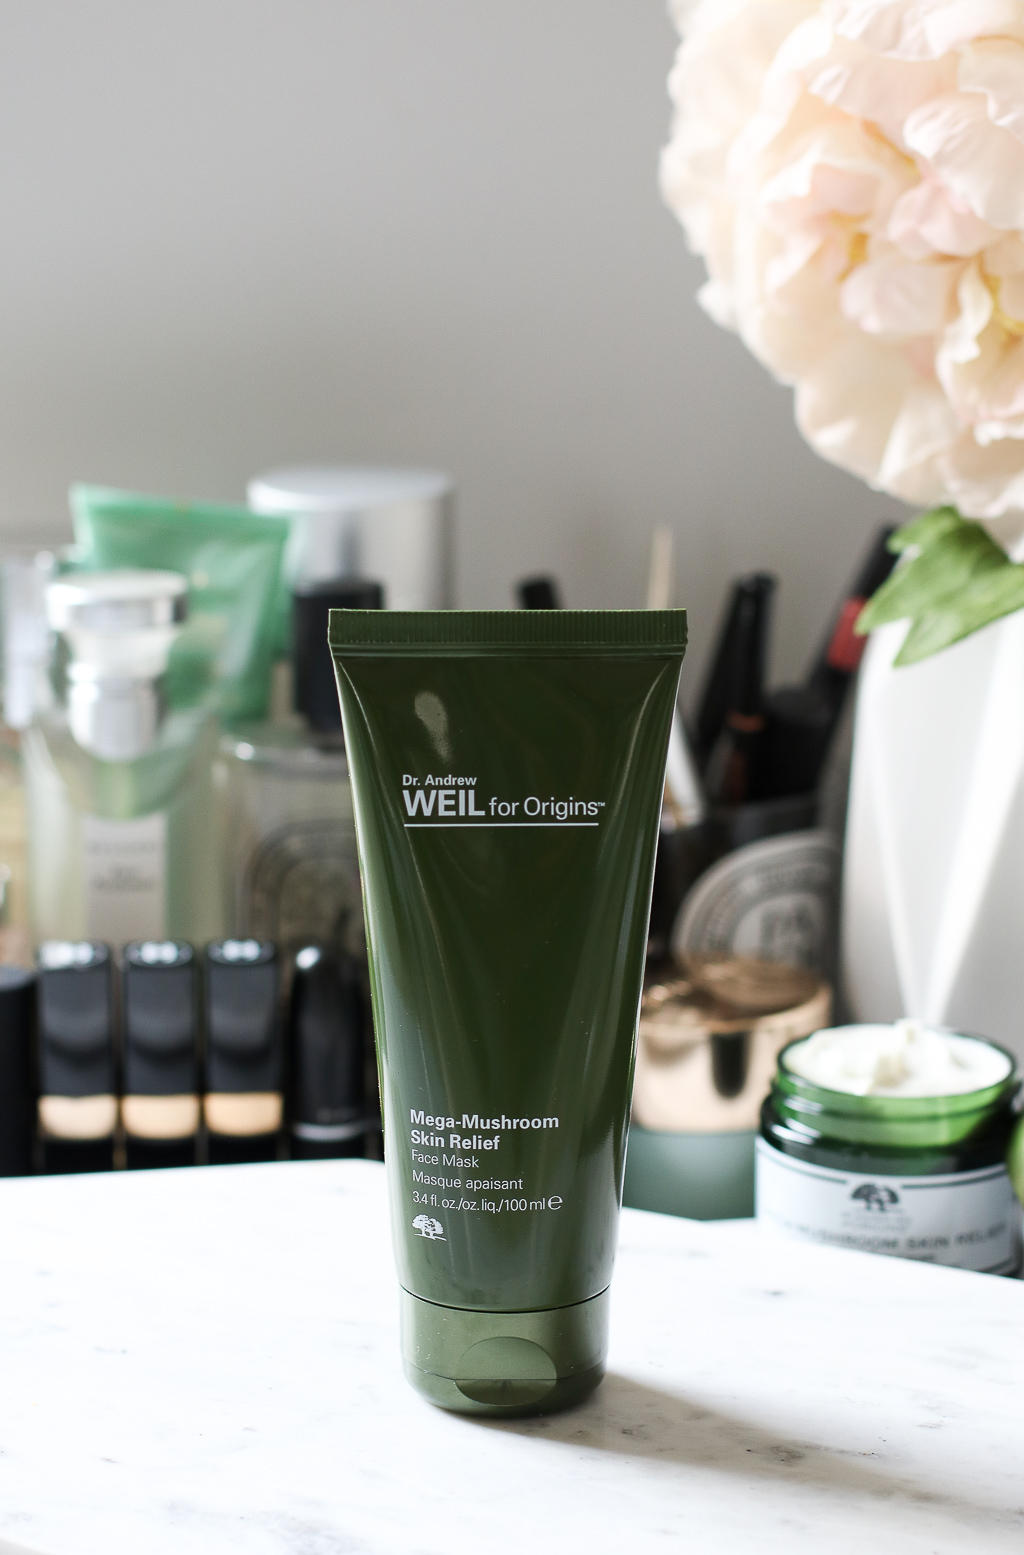 Origins Mega-Mushroom Skin Relief Line - exactly what your skin needs during these dry winter months! | Style Domination